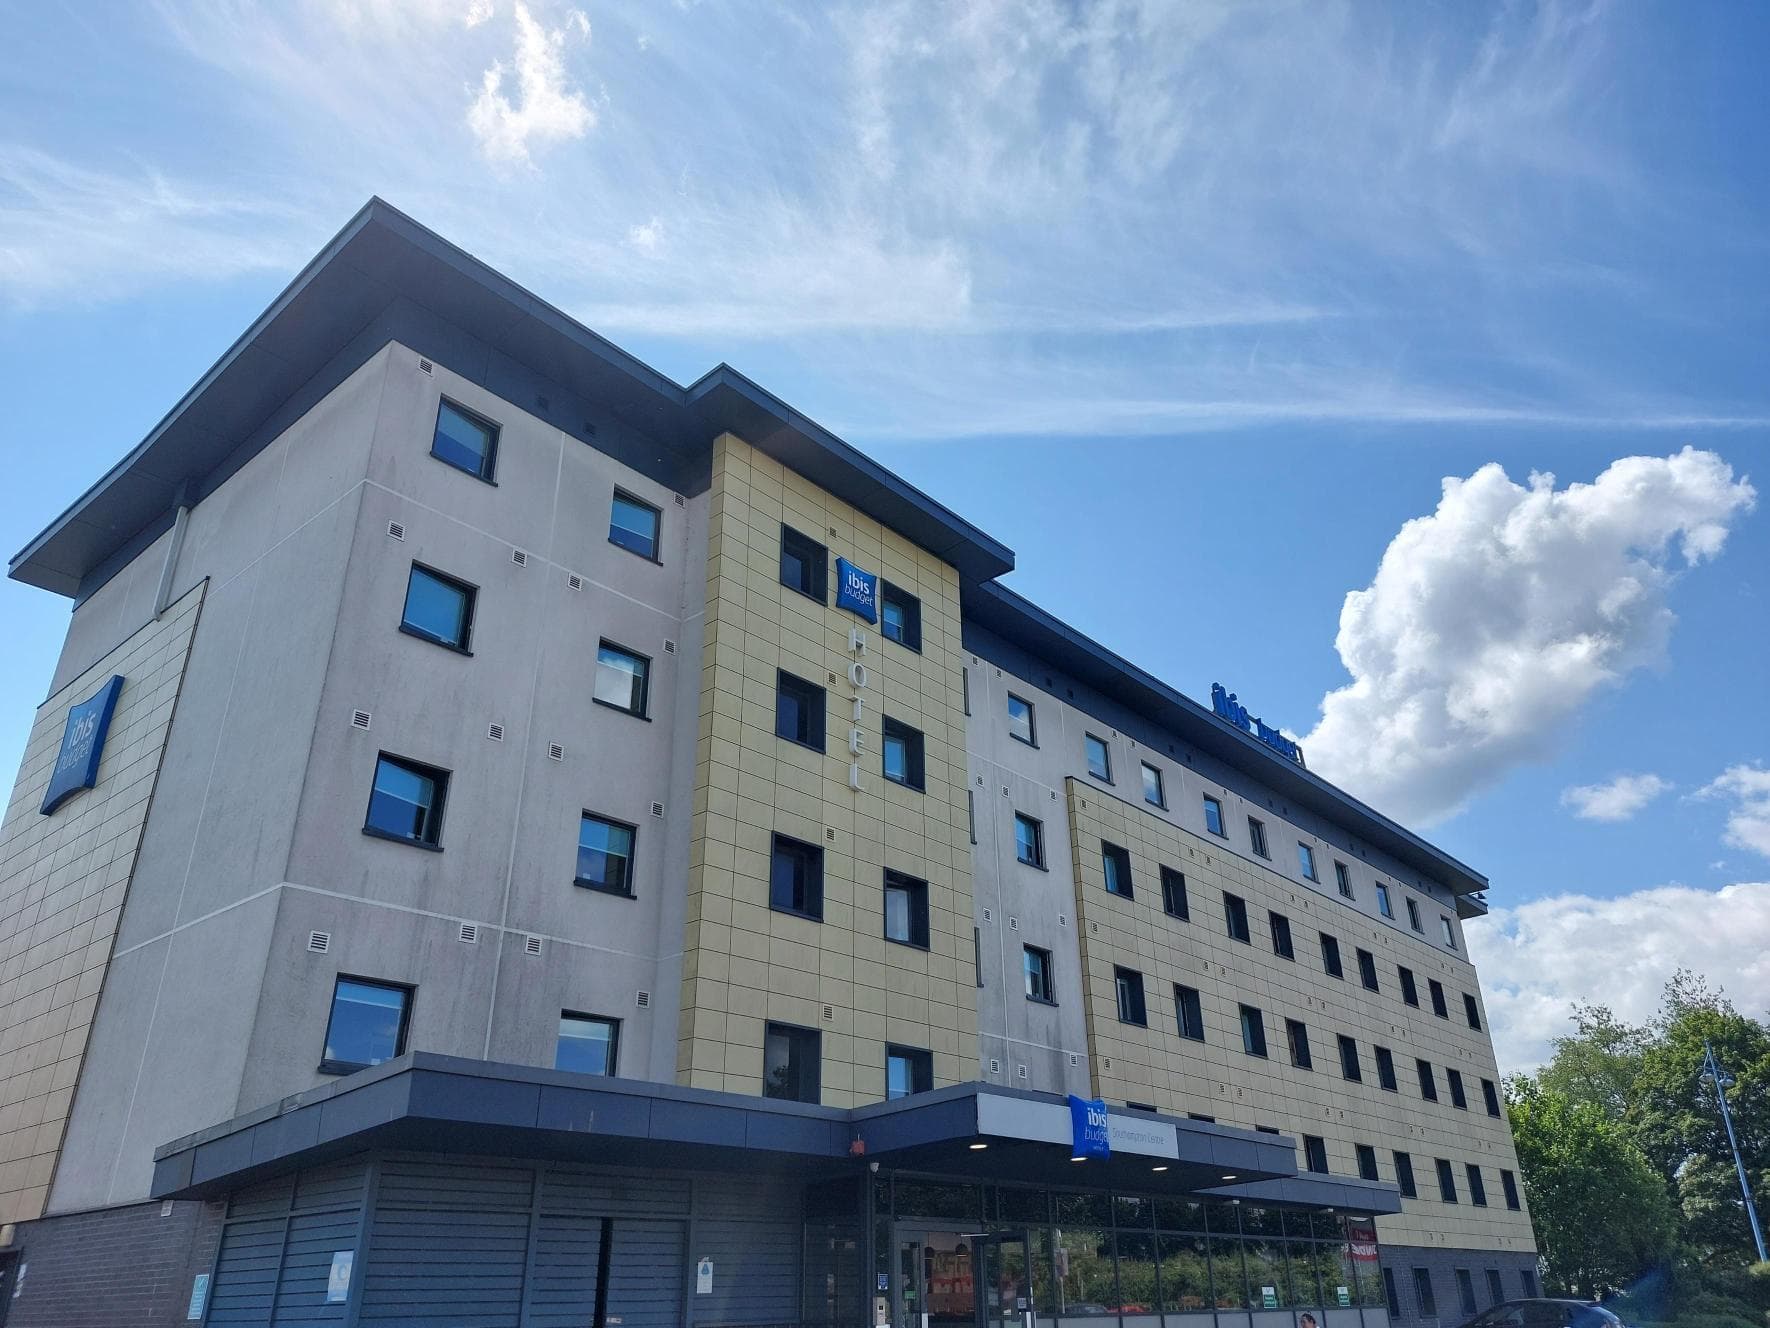 Ibis budget hotel southampton frontage in the summer